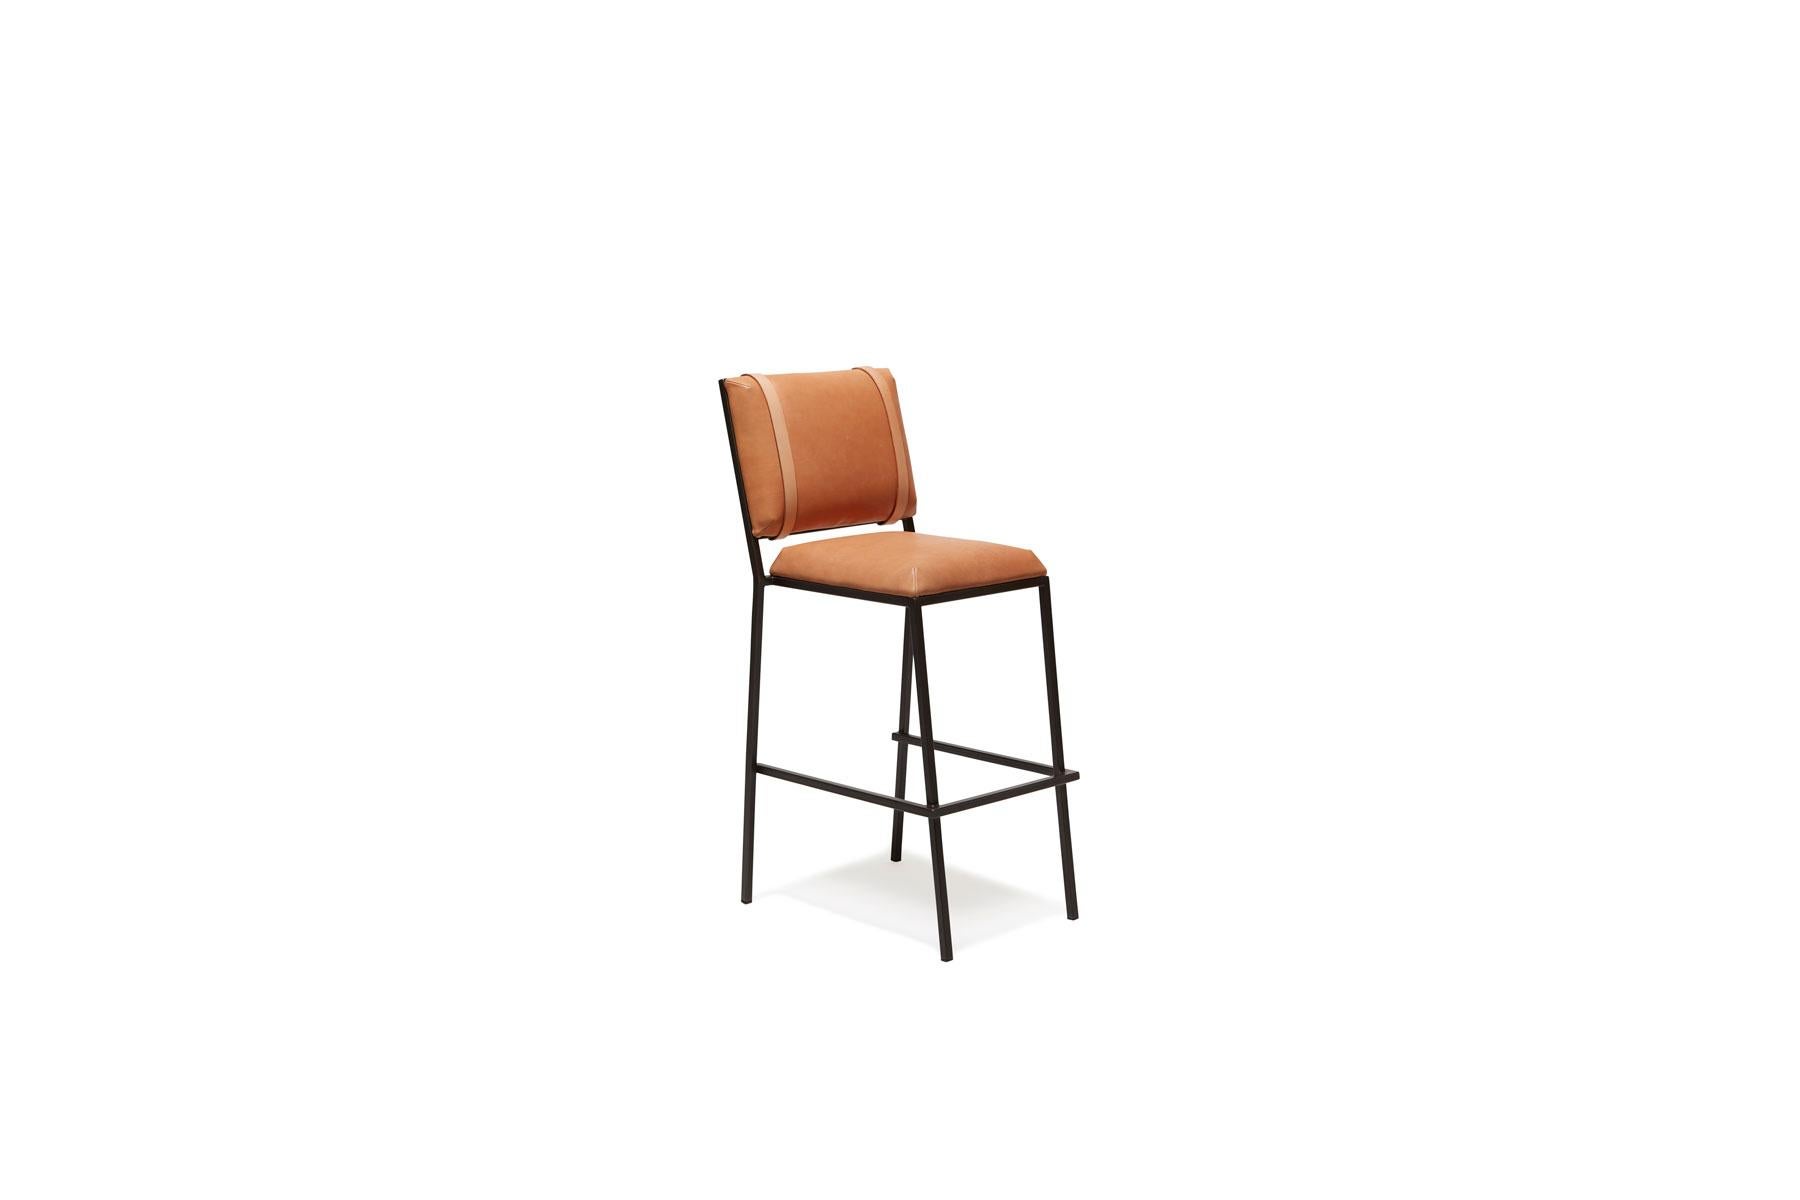 The Inheritance Barstool by Stephen Kenn is comfortable, stackable, and extensively customizable. It has been designed to withstand the rigors of a bar or restaurant environment, while still elegant enough to fit well in a residential home. 

Every